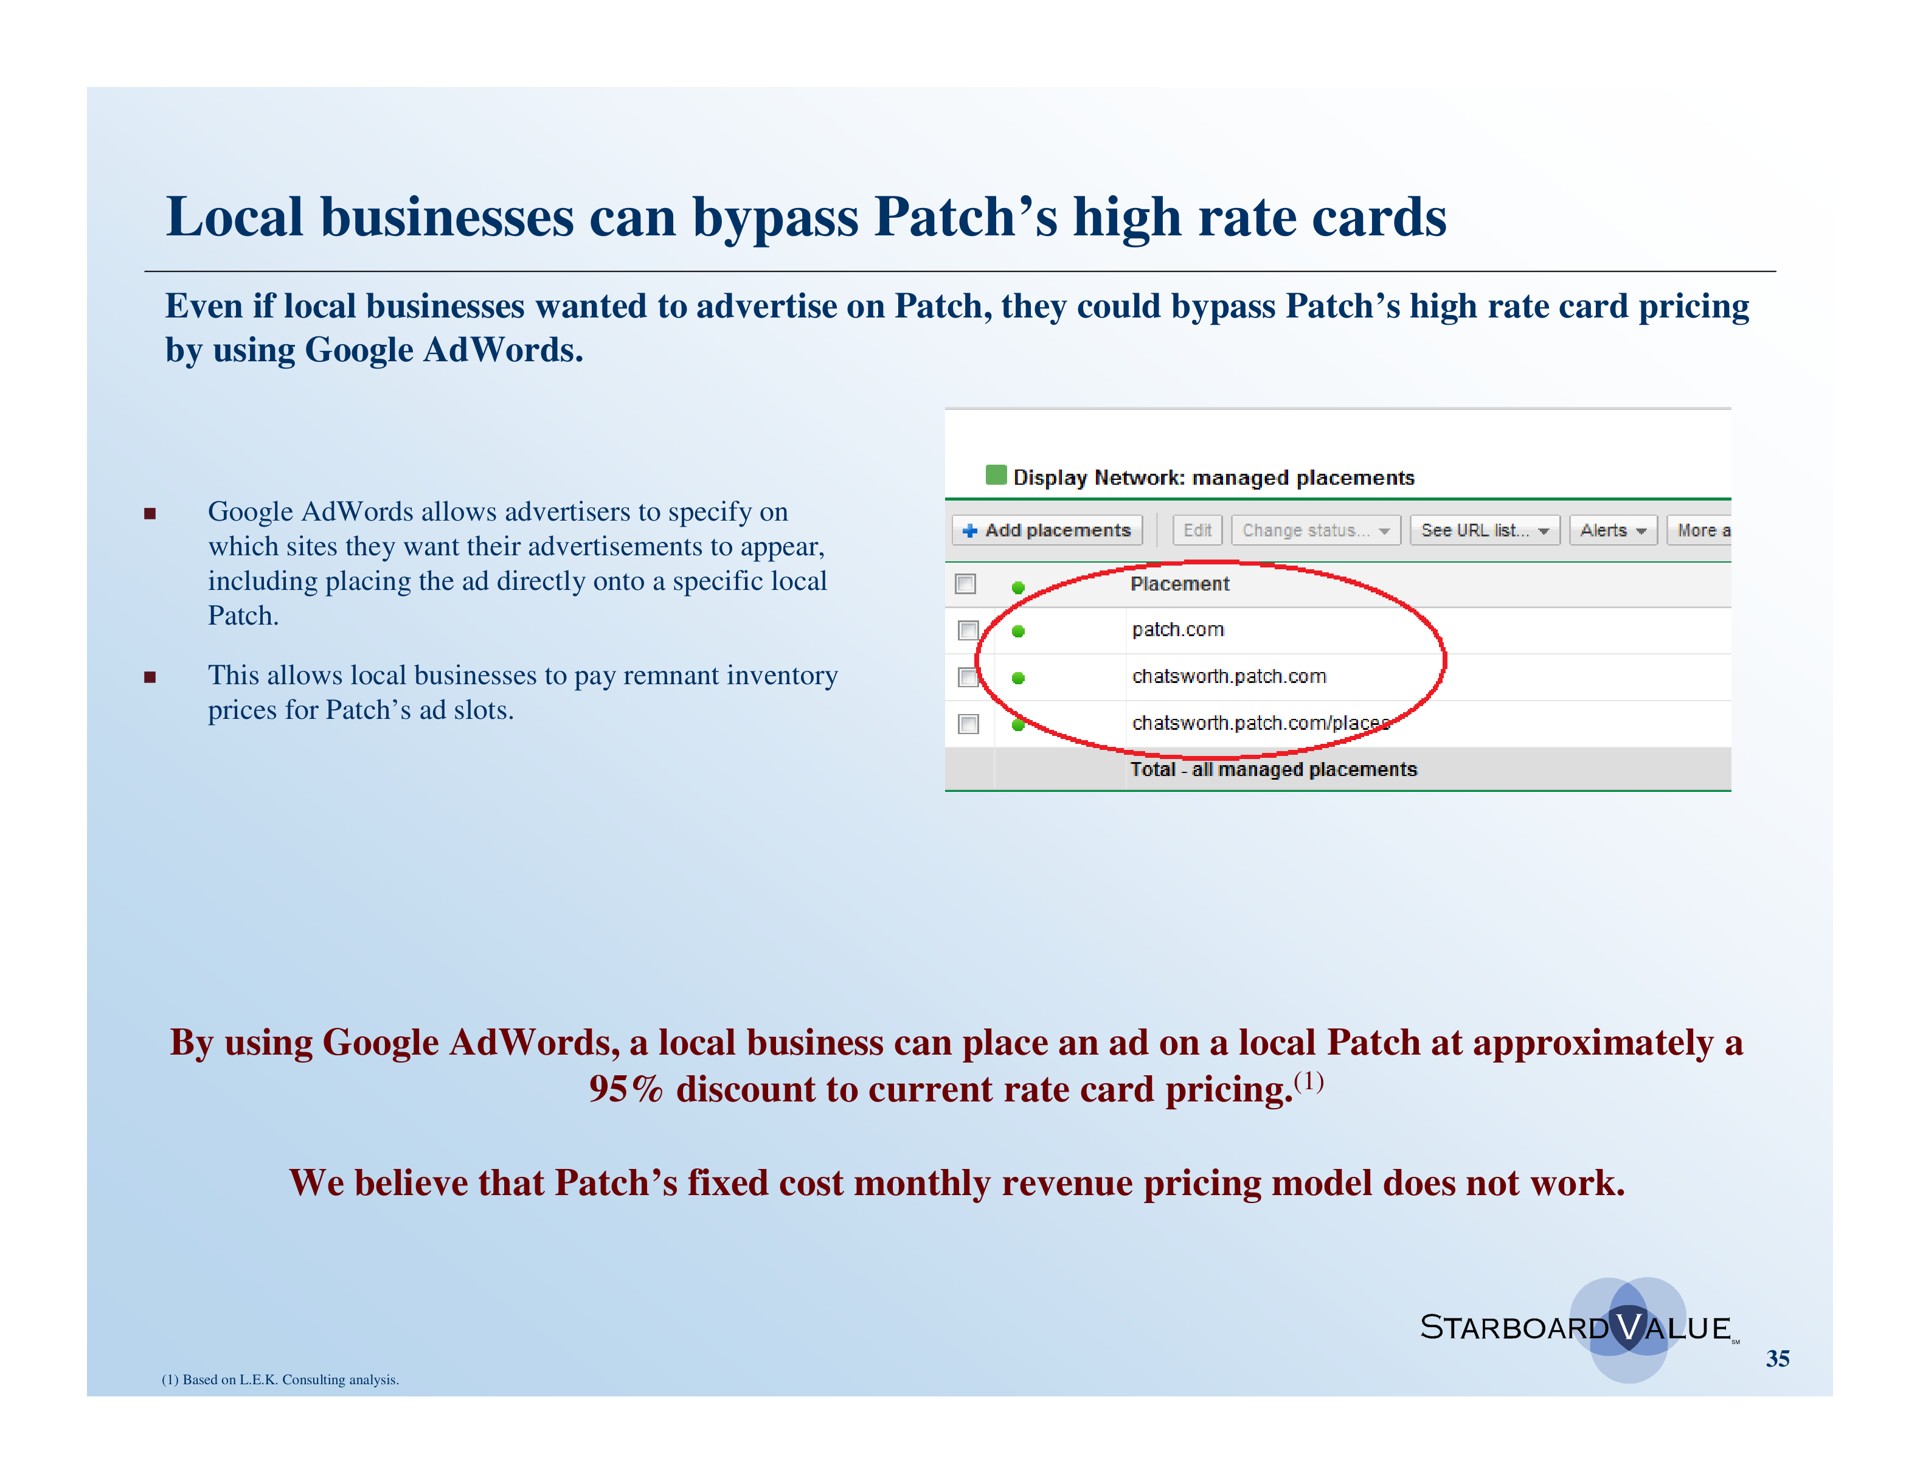 local businesses can bypass patch high rate cards | Starboard Value